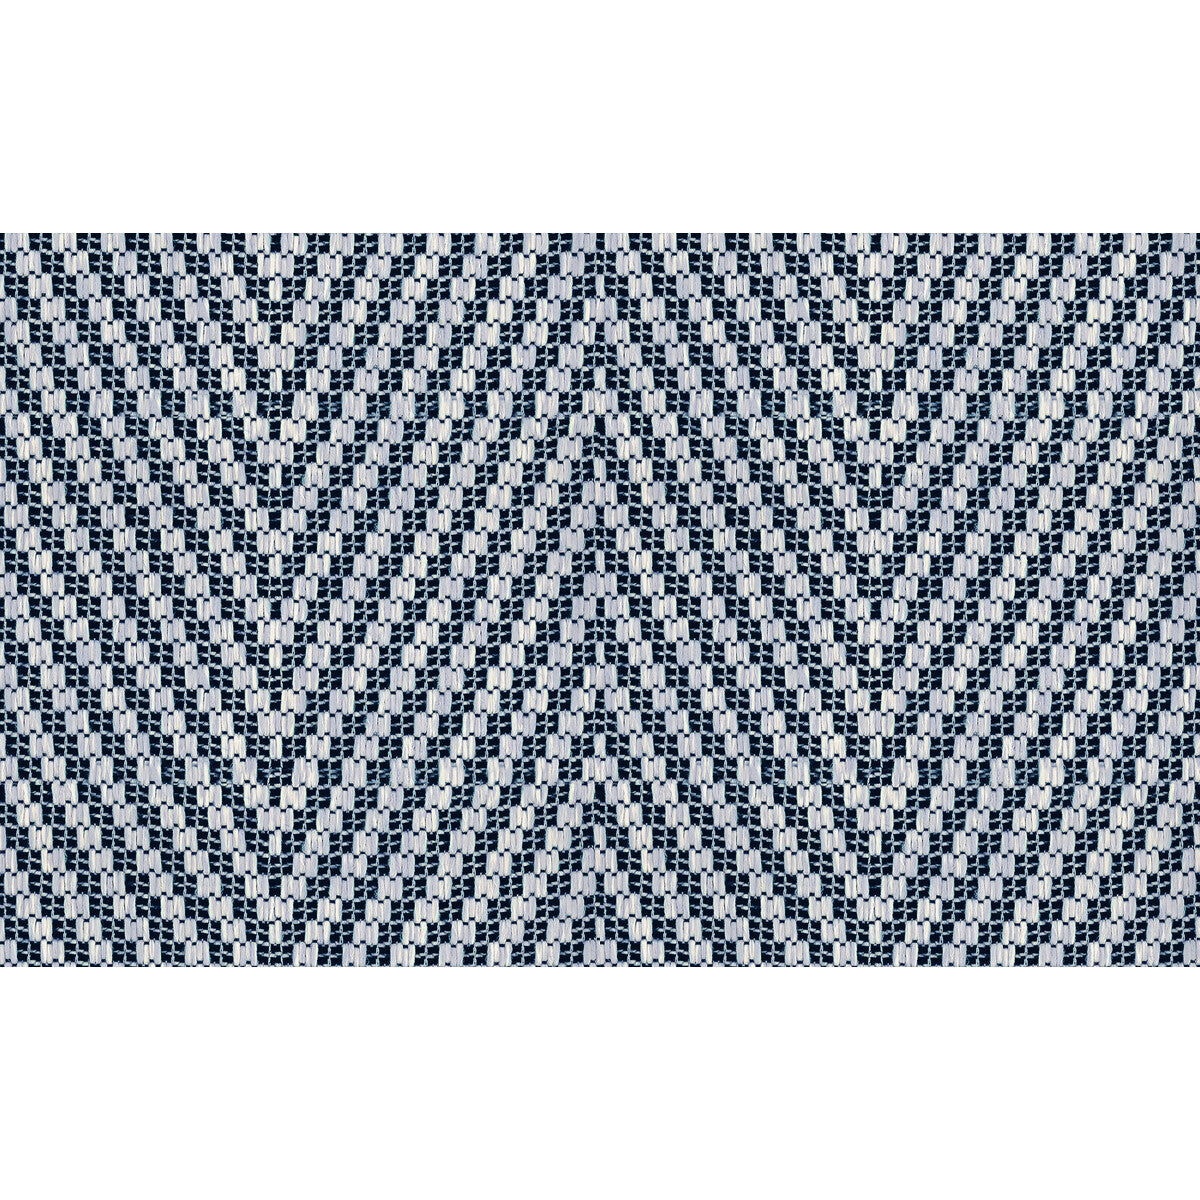 Kali Chevron fabric in indigo color - pattern 33495.50.0 - by Kravet Design in the Echo Indoor Outdoor Ibiza collection